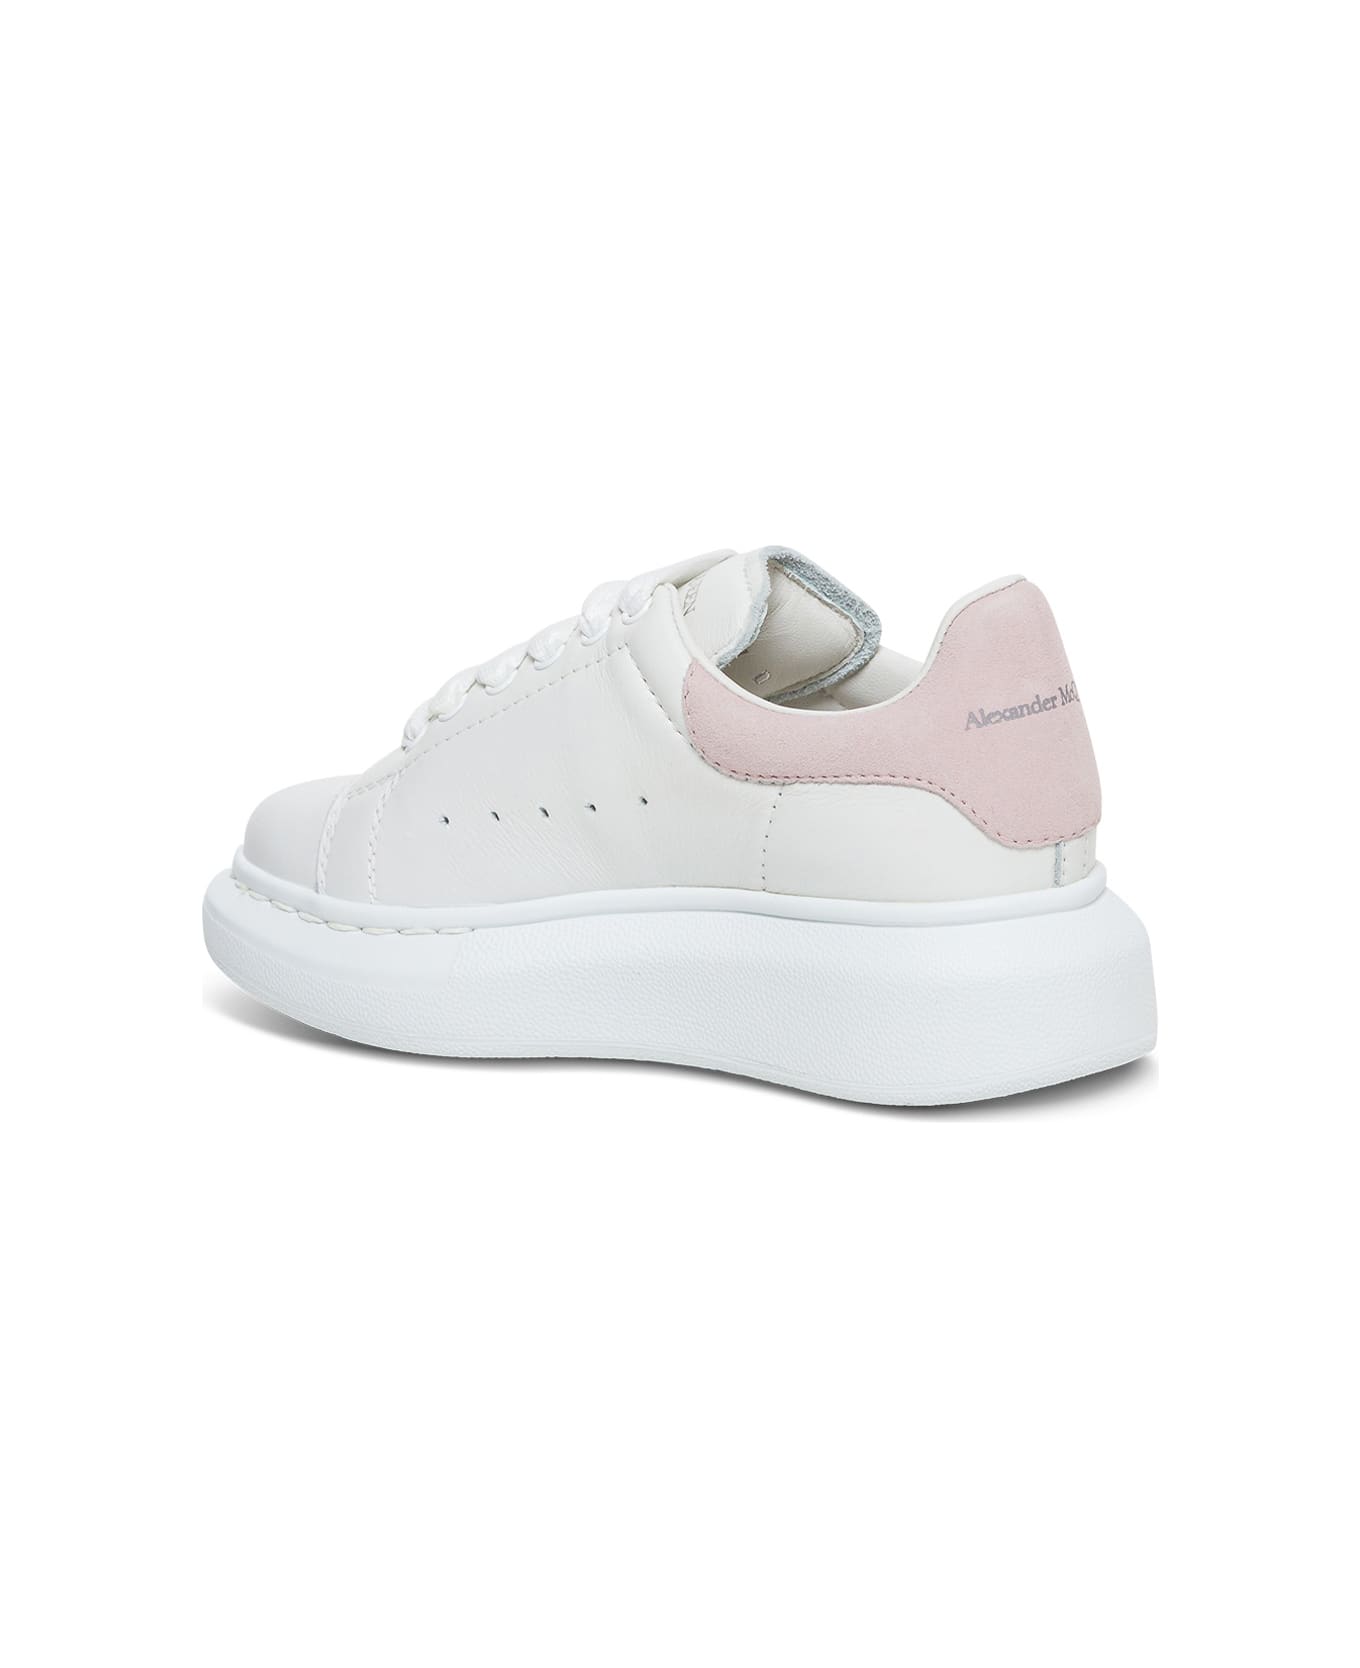 Alexander McQueen White Leather Oversize Sneakers - White